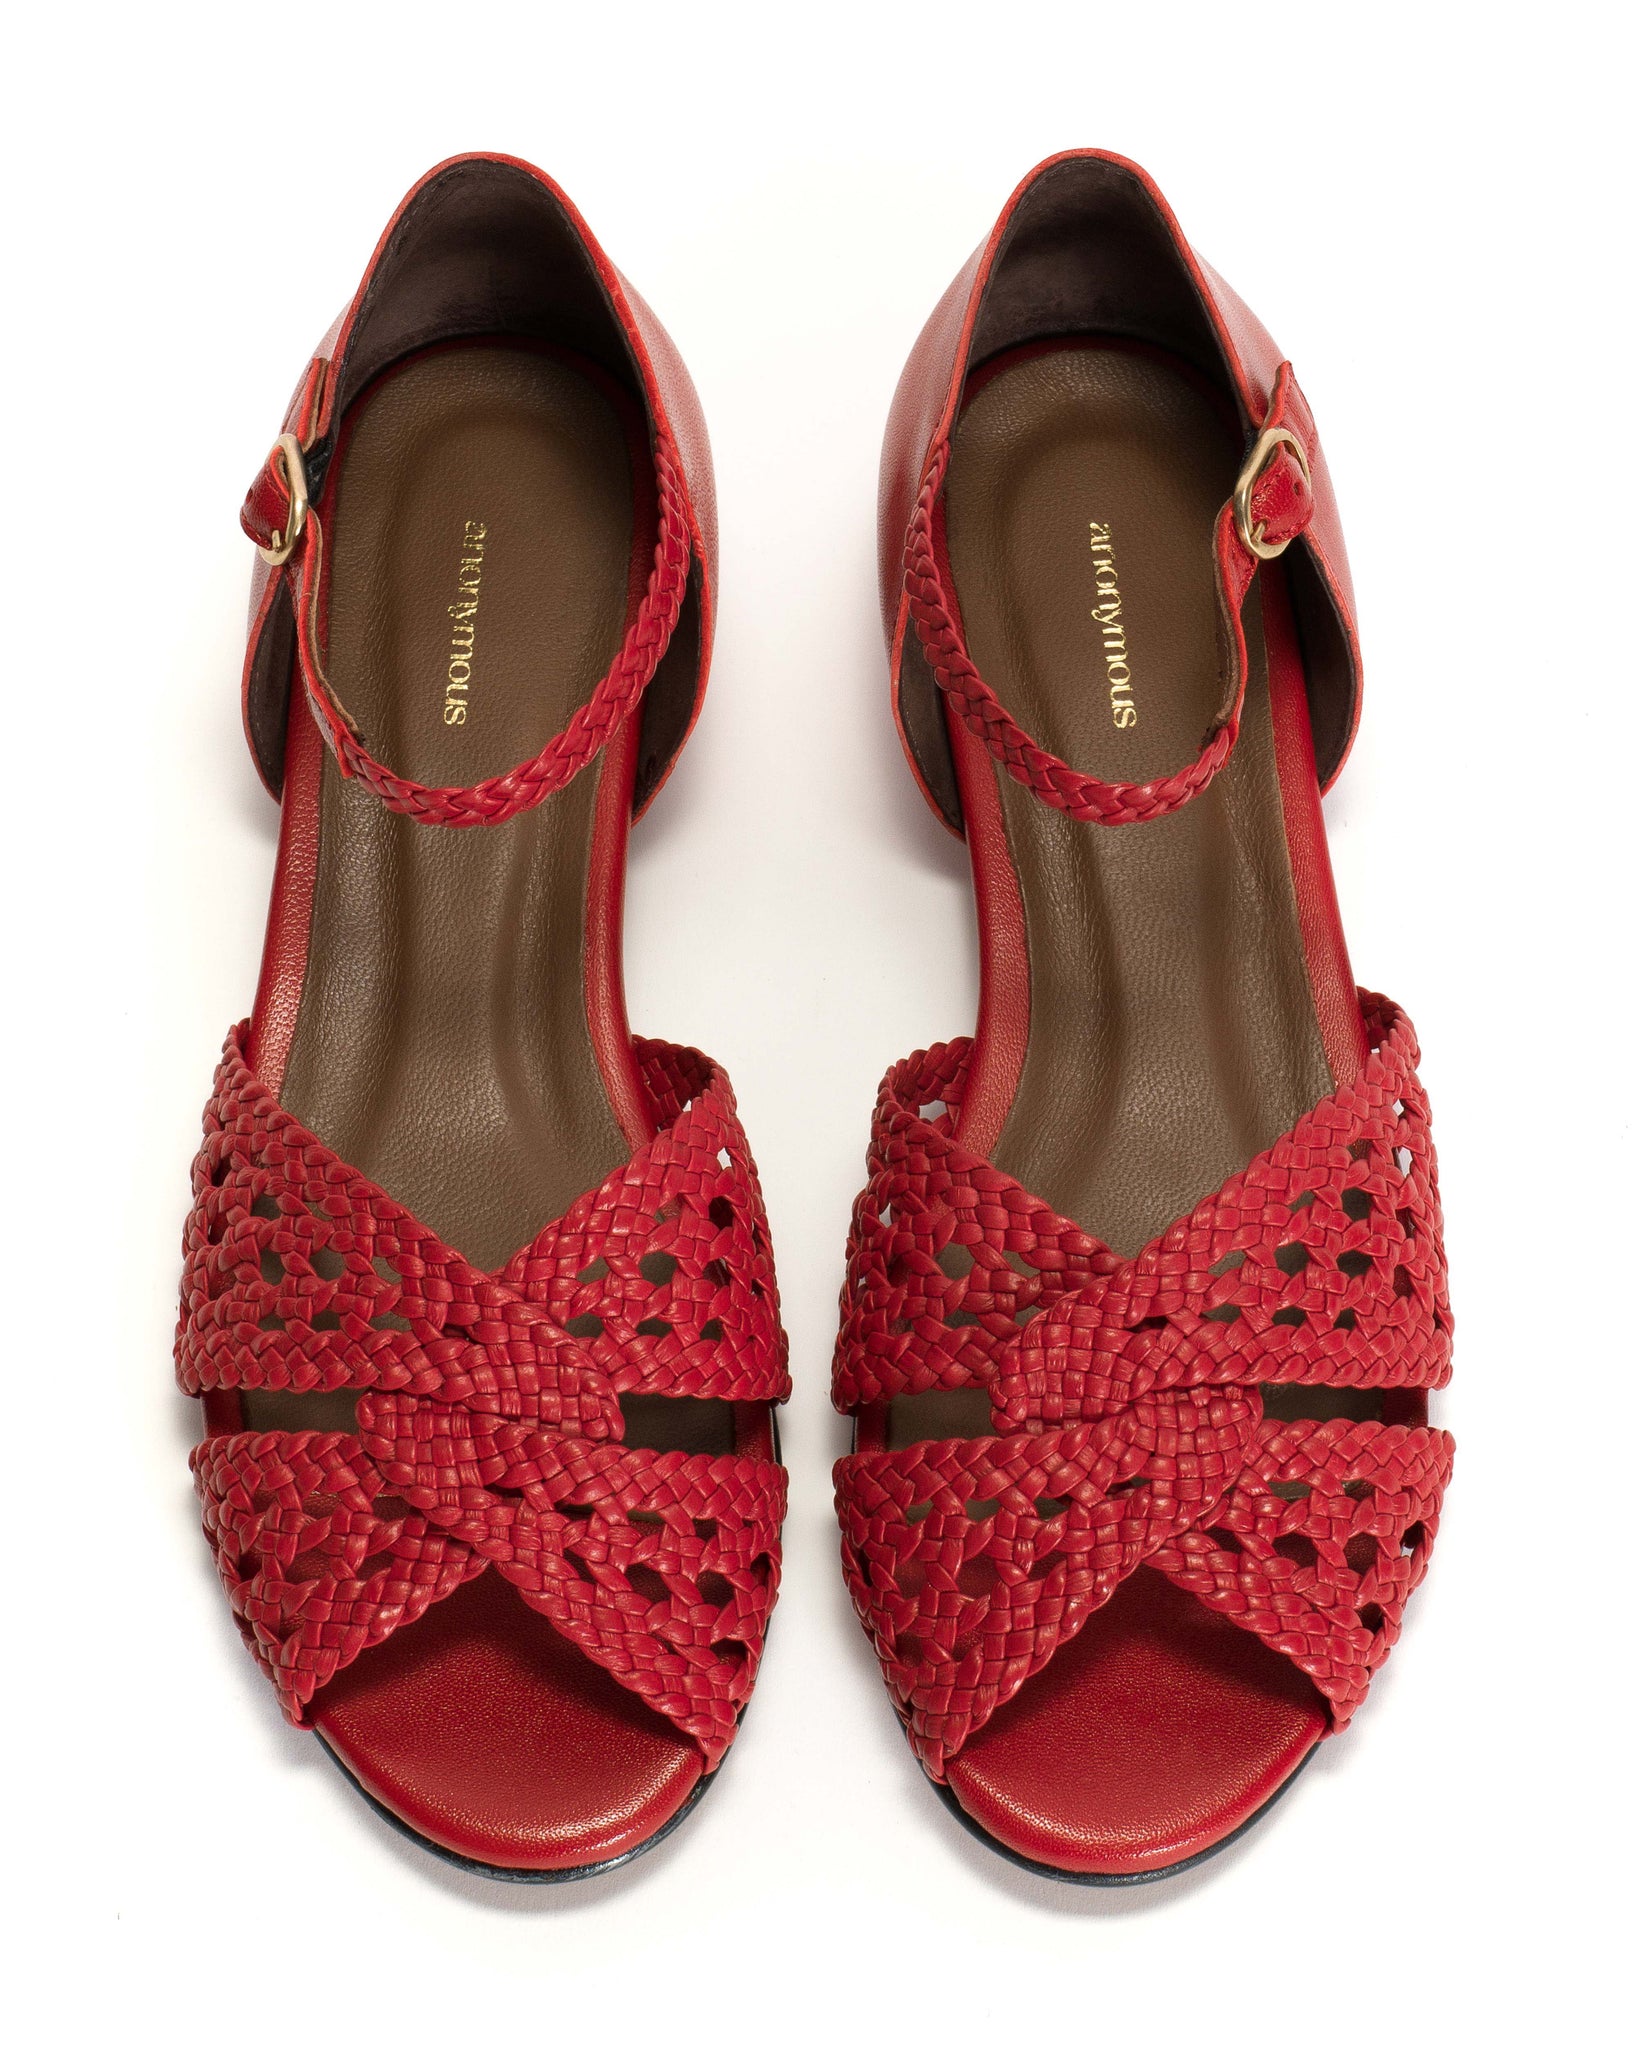 Olina 20 Hand-braided leather Ruby red